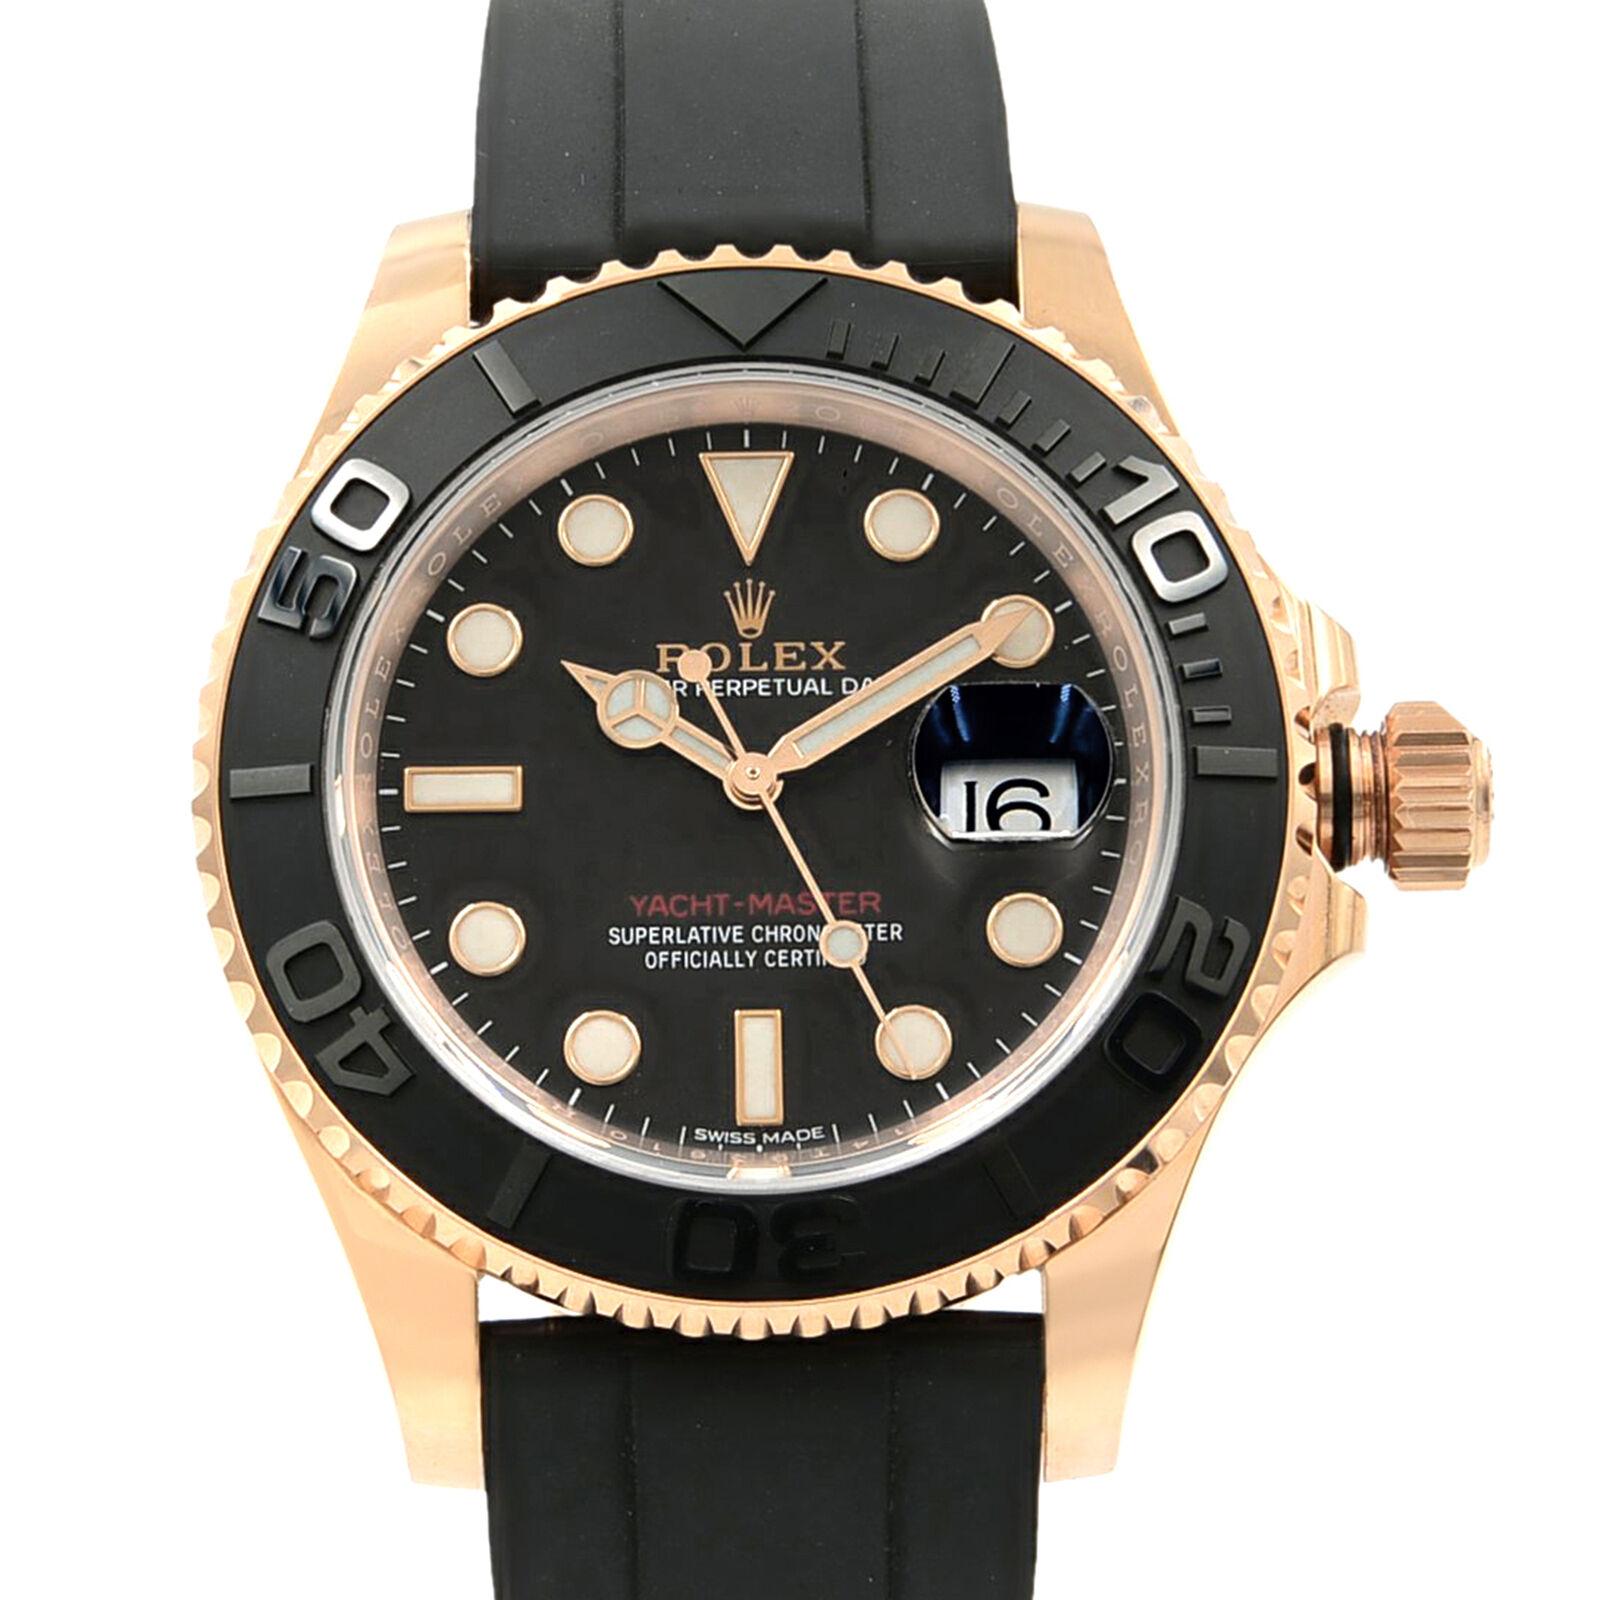 This pre-owned Rolex Yacht-Master 116655 is a beautiful men's timepiece that is powered by an automatic movement which is cased in a rose gold case. It has a round shape face, date dial and has hand sticks & dots style markers. It is completed with